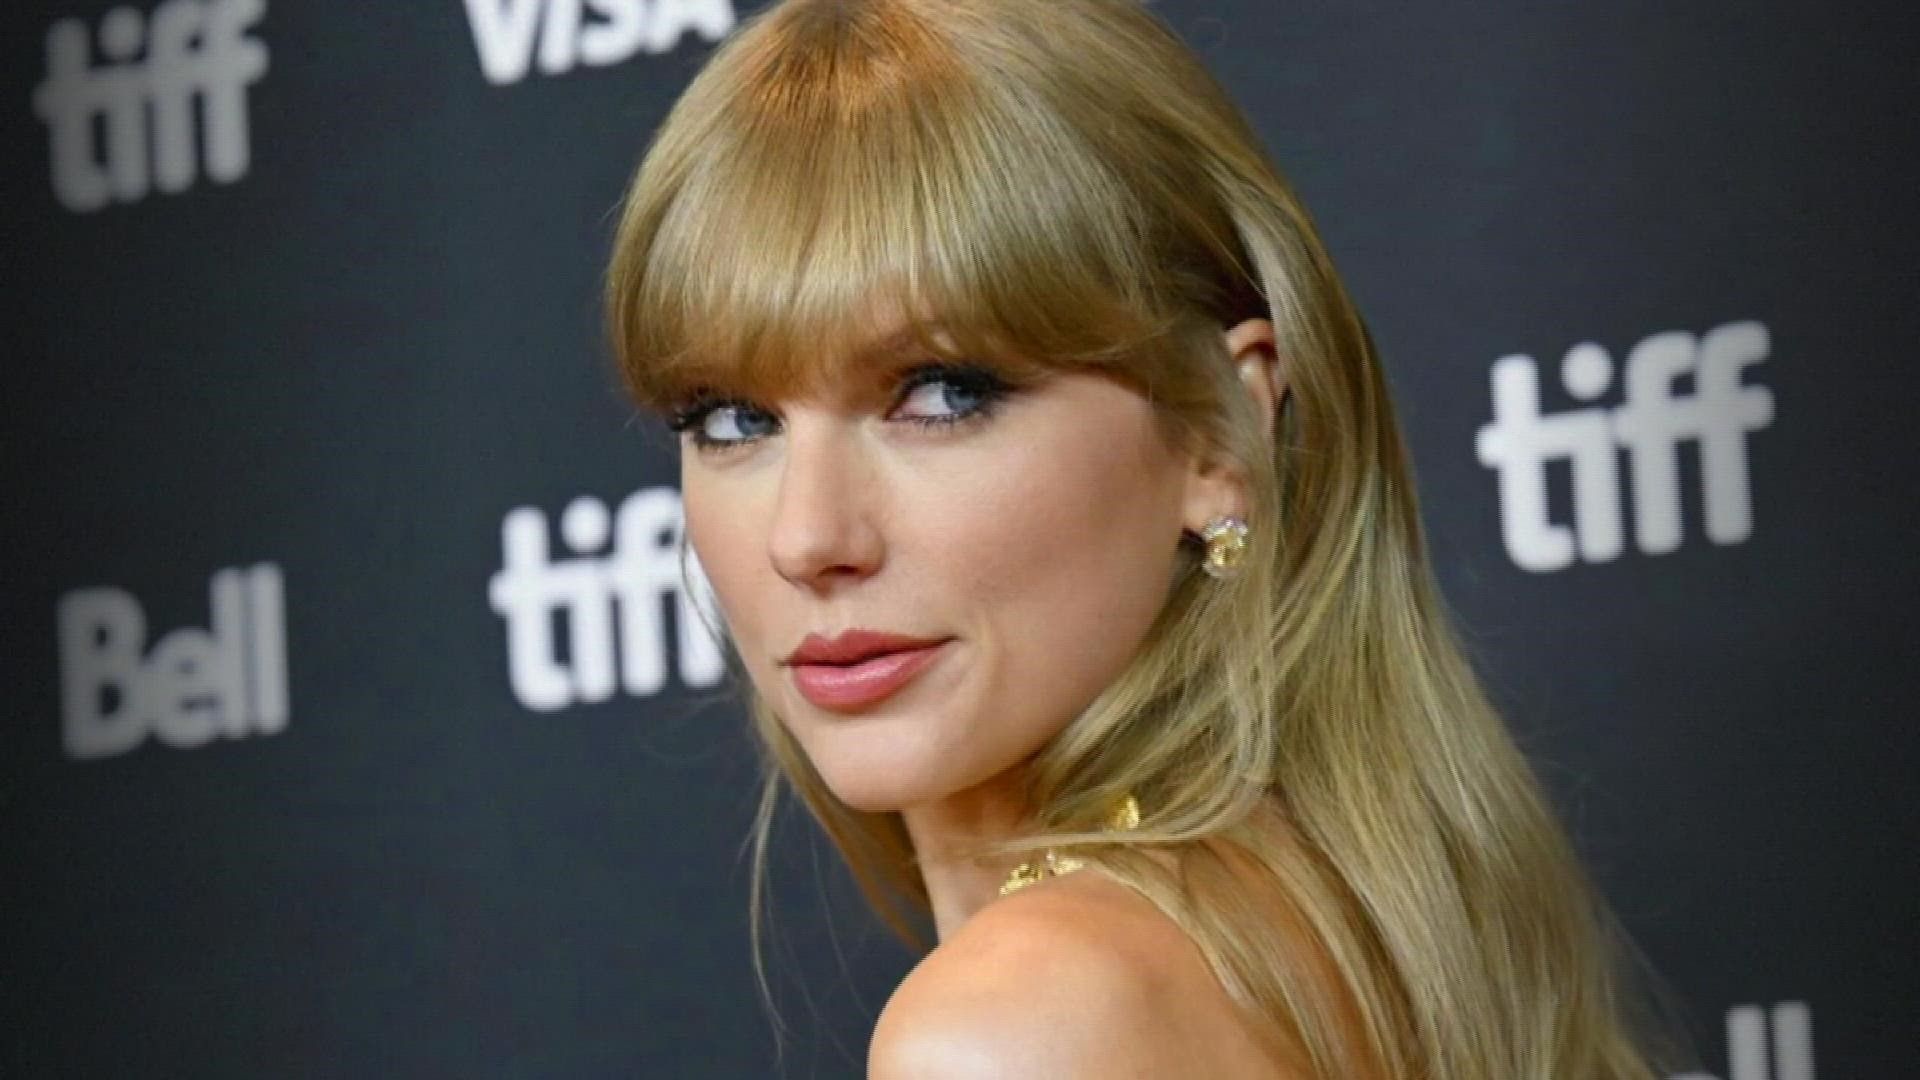 26 Swifties are suing Ticketmaster and its parent company Live Nation for fraud and price-fixing.